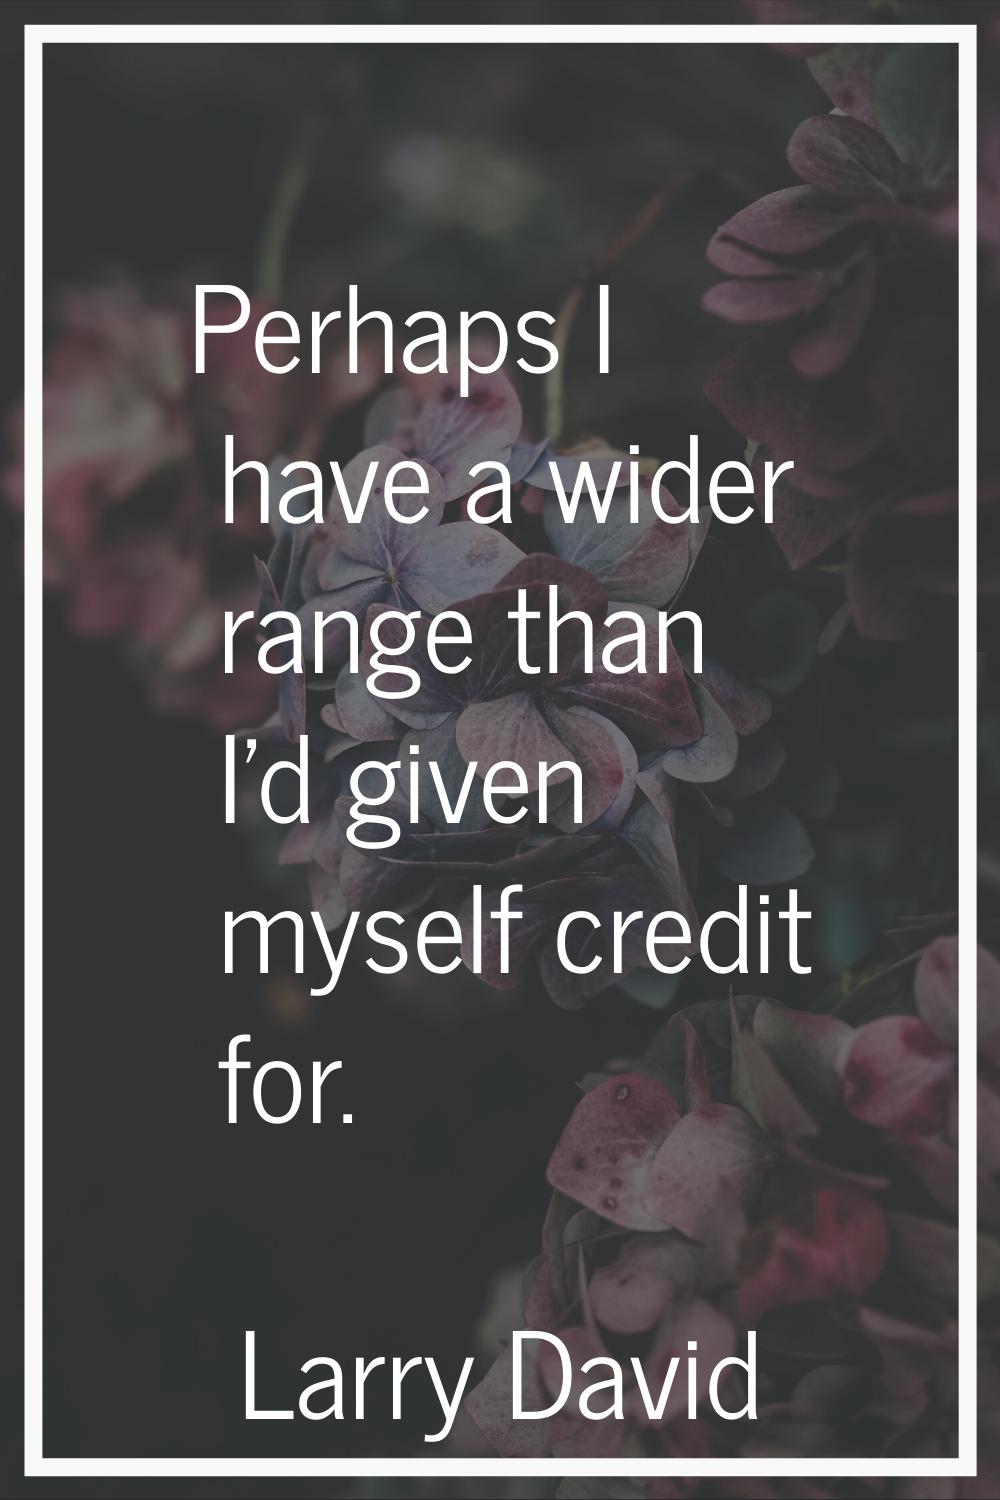 Perhaps I have a wider range than I'd given myself credit for.